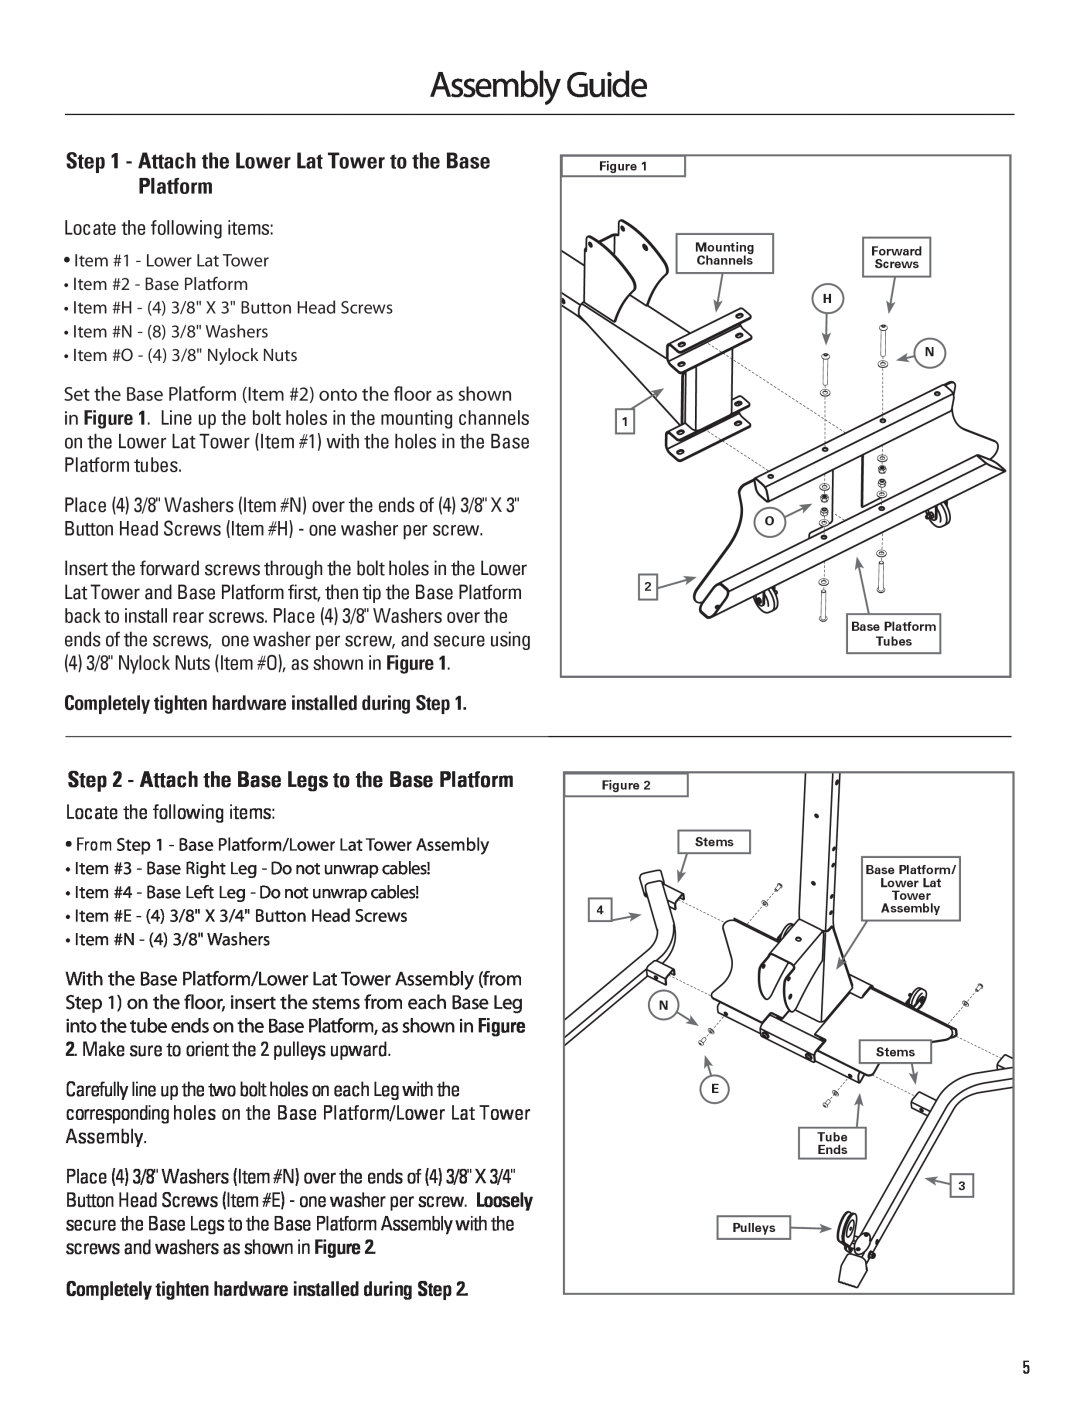 Bowflex 001-6961 manual Assembly Guide, Attach the Lower Lat Tower to the Base Platform 